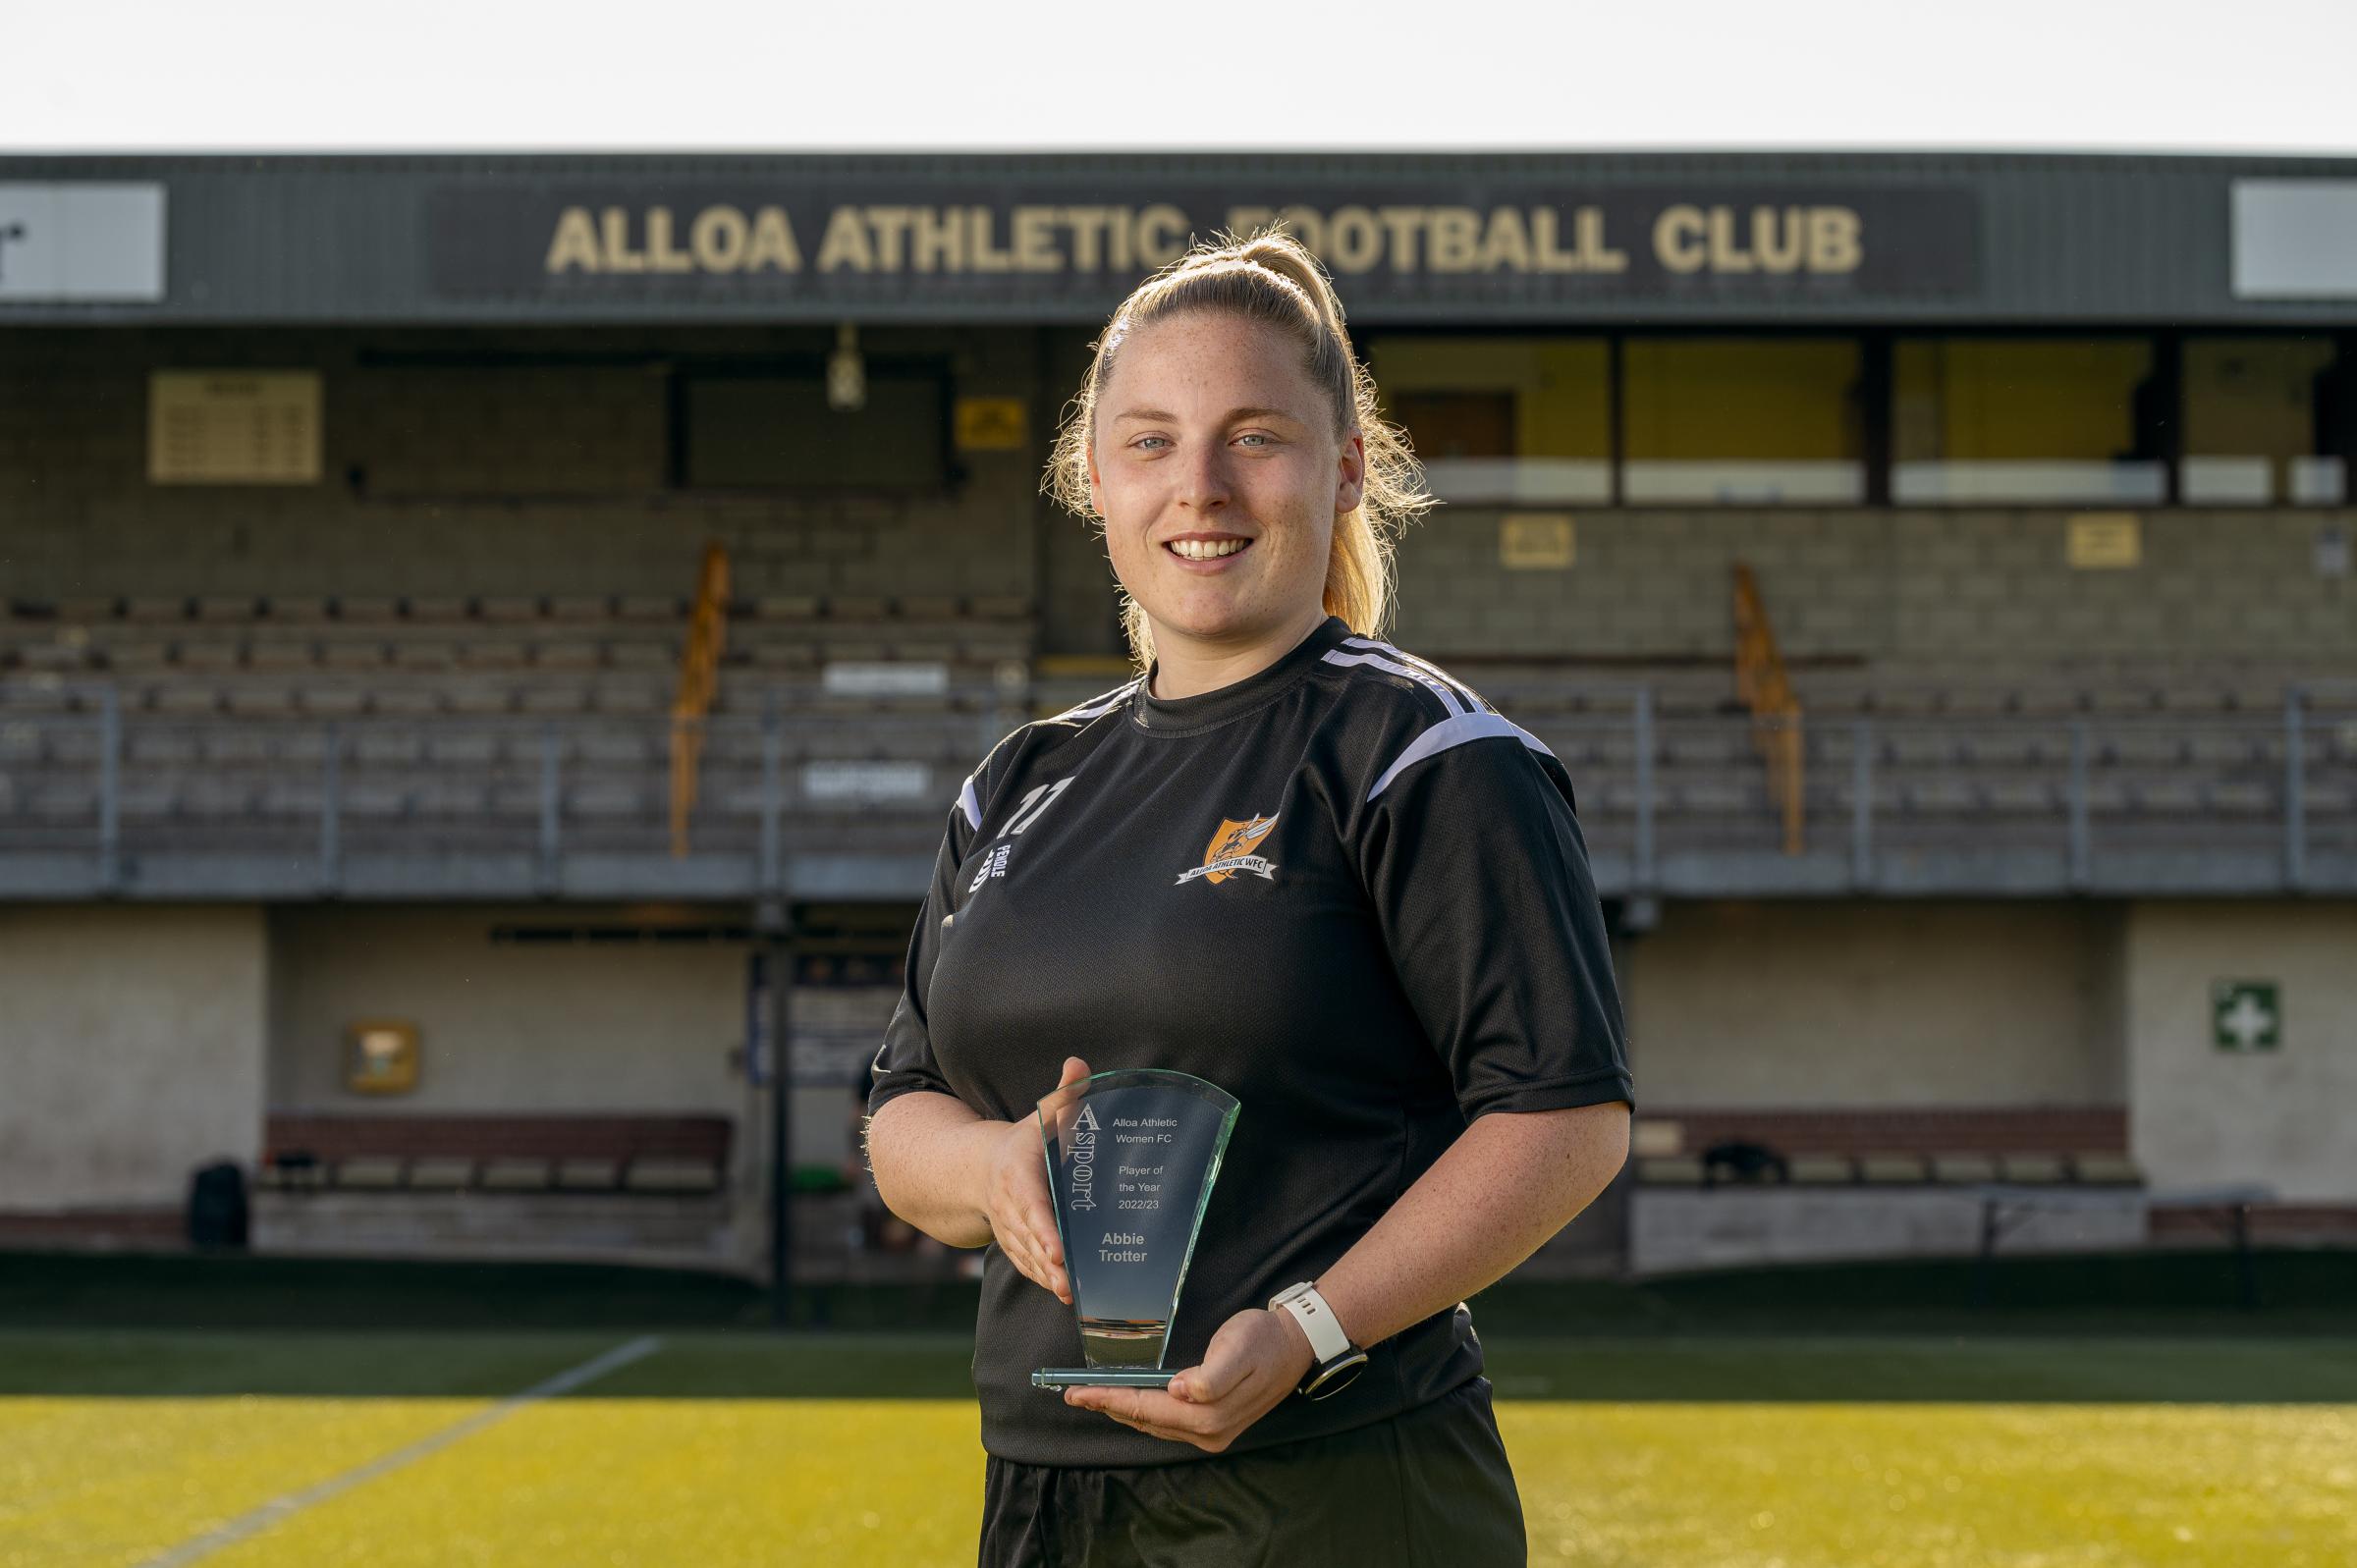 Alloa's Abbie Trotter wins Advertiser Sport Player of the Year